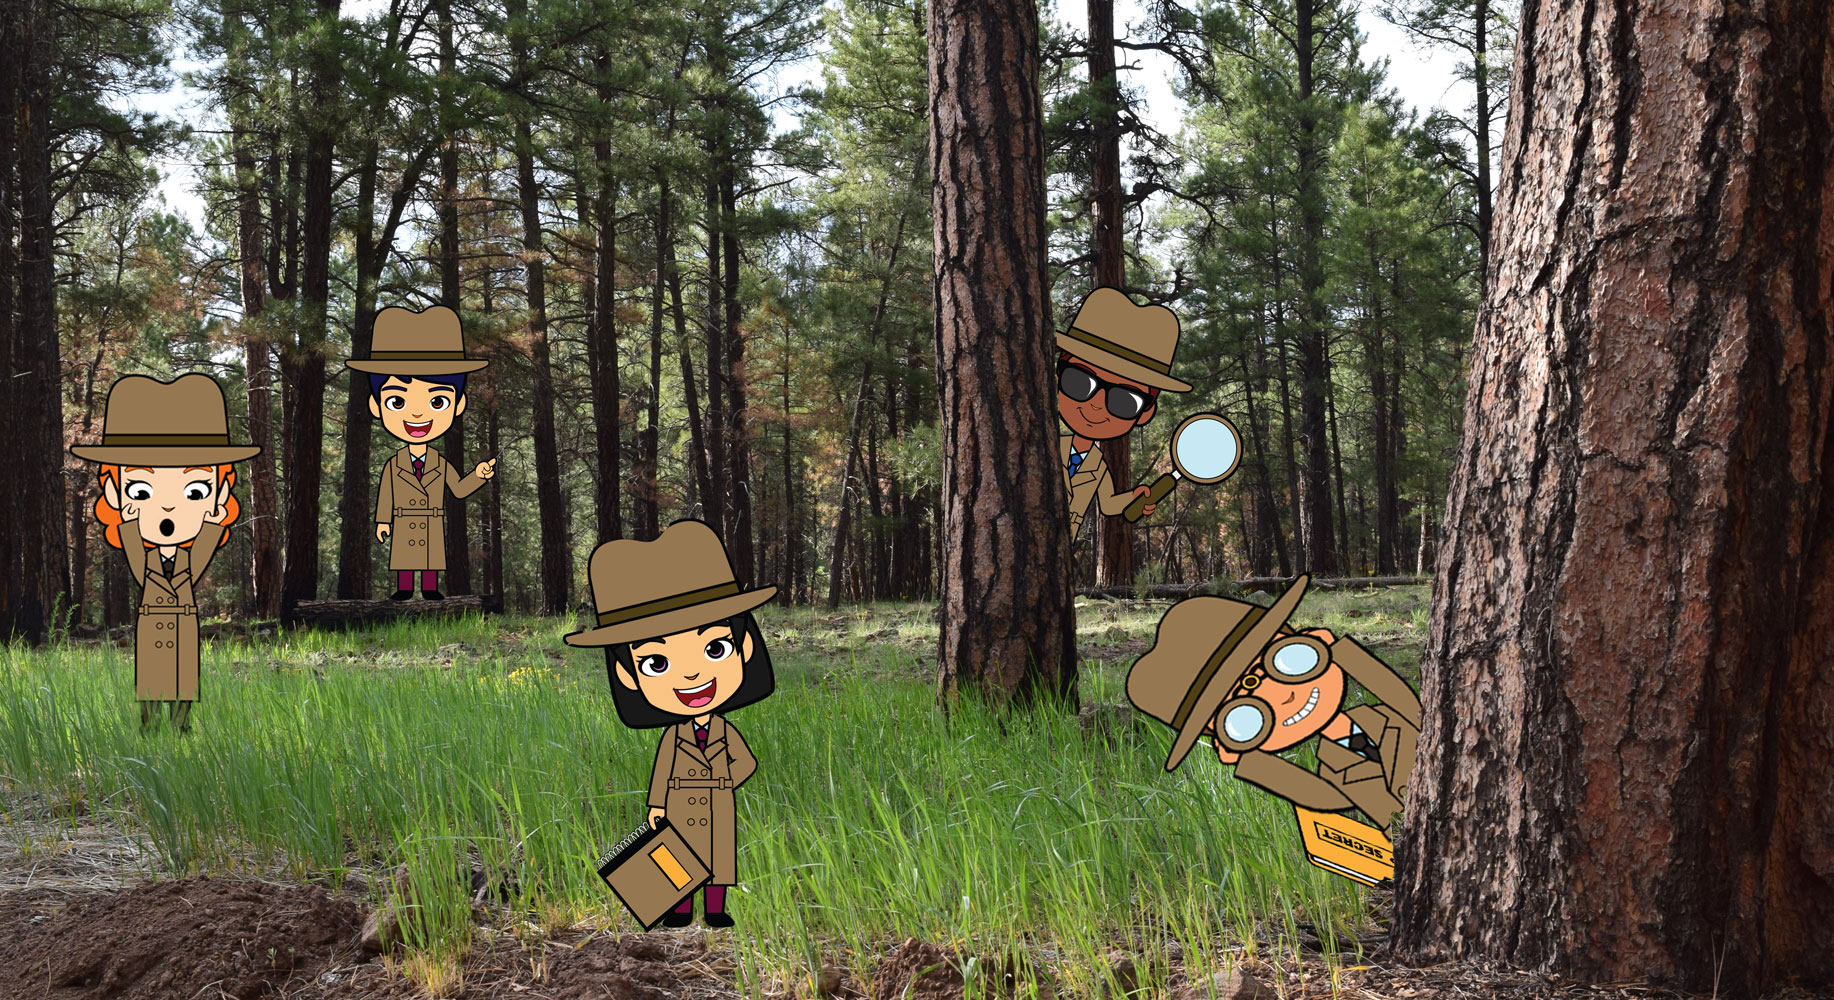 Detective kids are ready to investigate the case of the unhealthy forest.